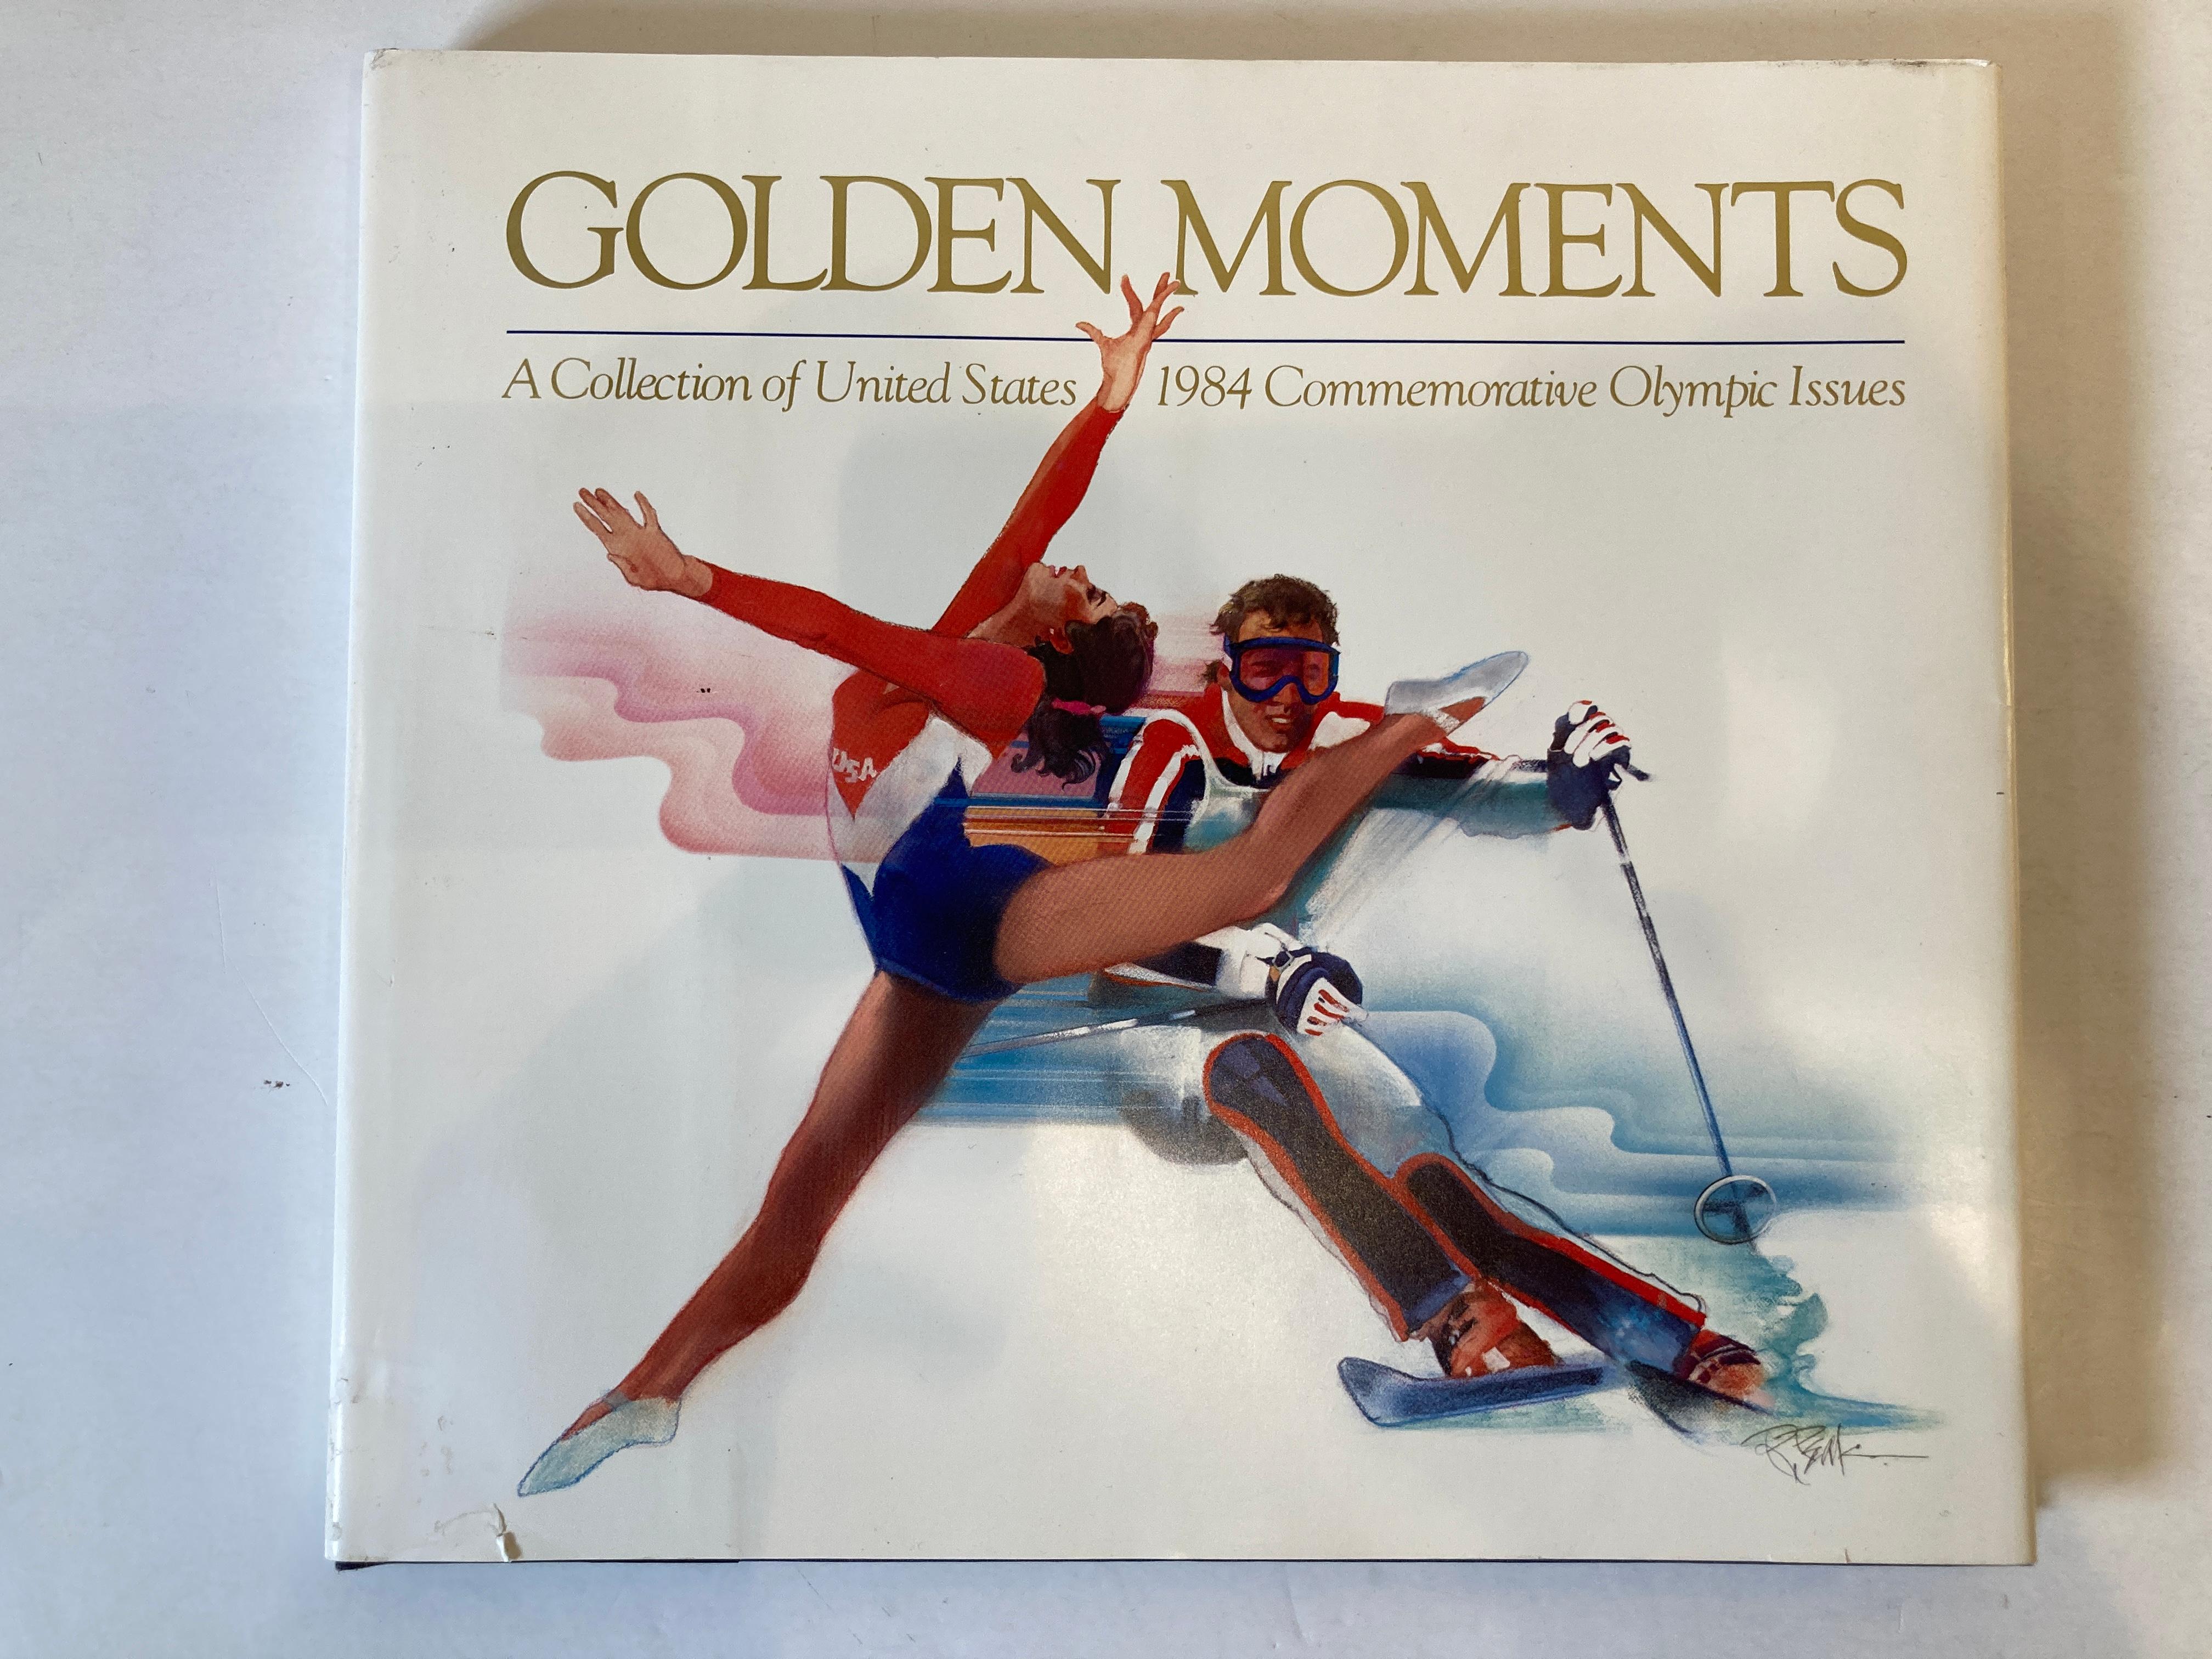 Golden Moments: A Collection of United States 1984 Commemorative Olympic Issues
MICHENER, James A. (foreword)
Published by United States Postal Service, Washington, DC, 1984
Numerous color illustrations. A superb, tight first edition of what's